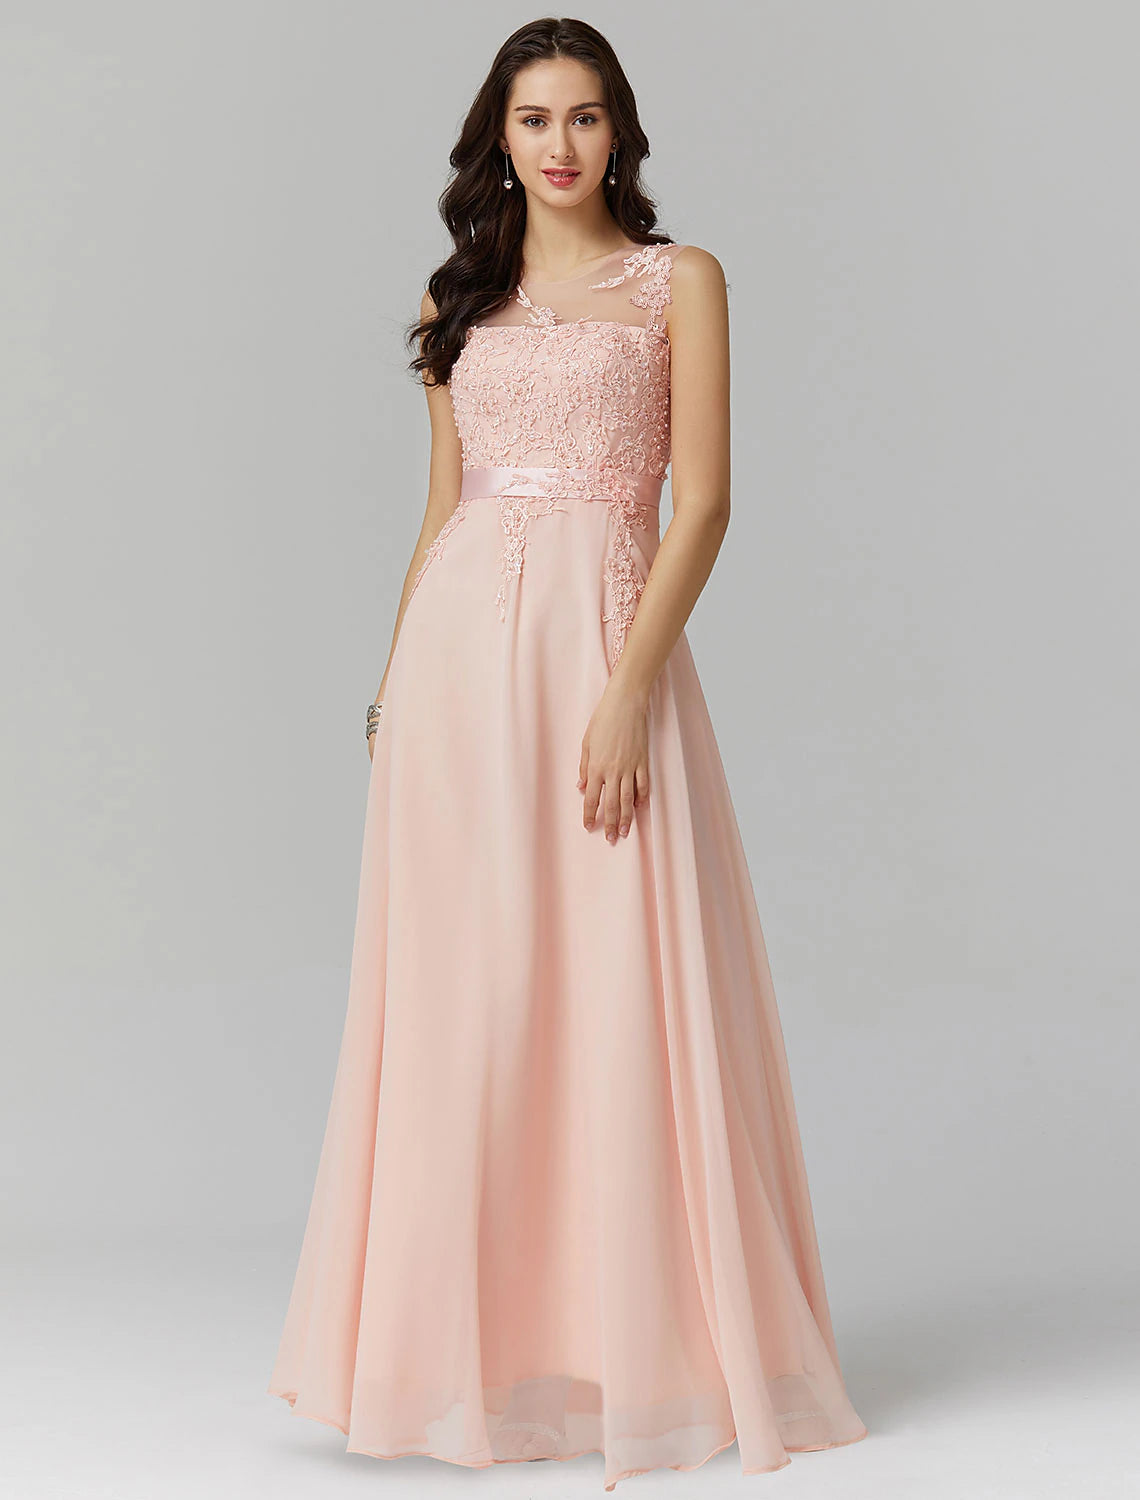 A-Line Chinese Style Dress Wedding Guest Prom Floor Length Sleeveless Illusion Neck Chiffon V Back with Beading Appliques